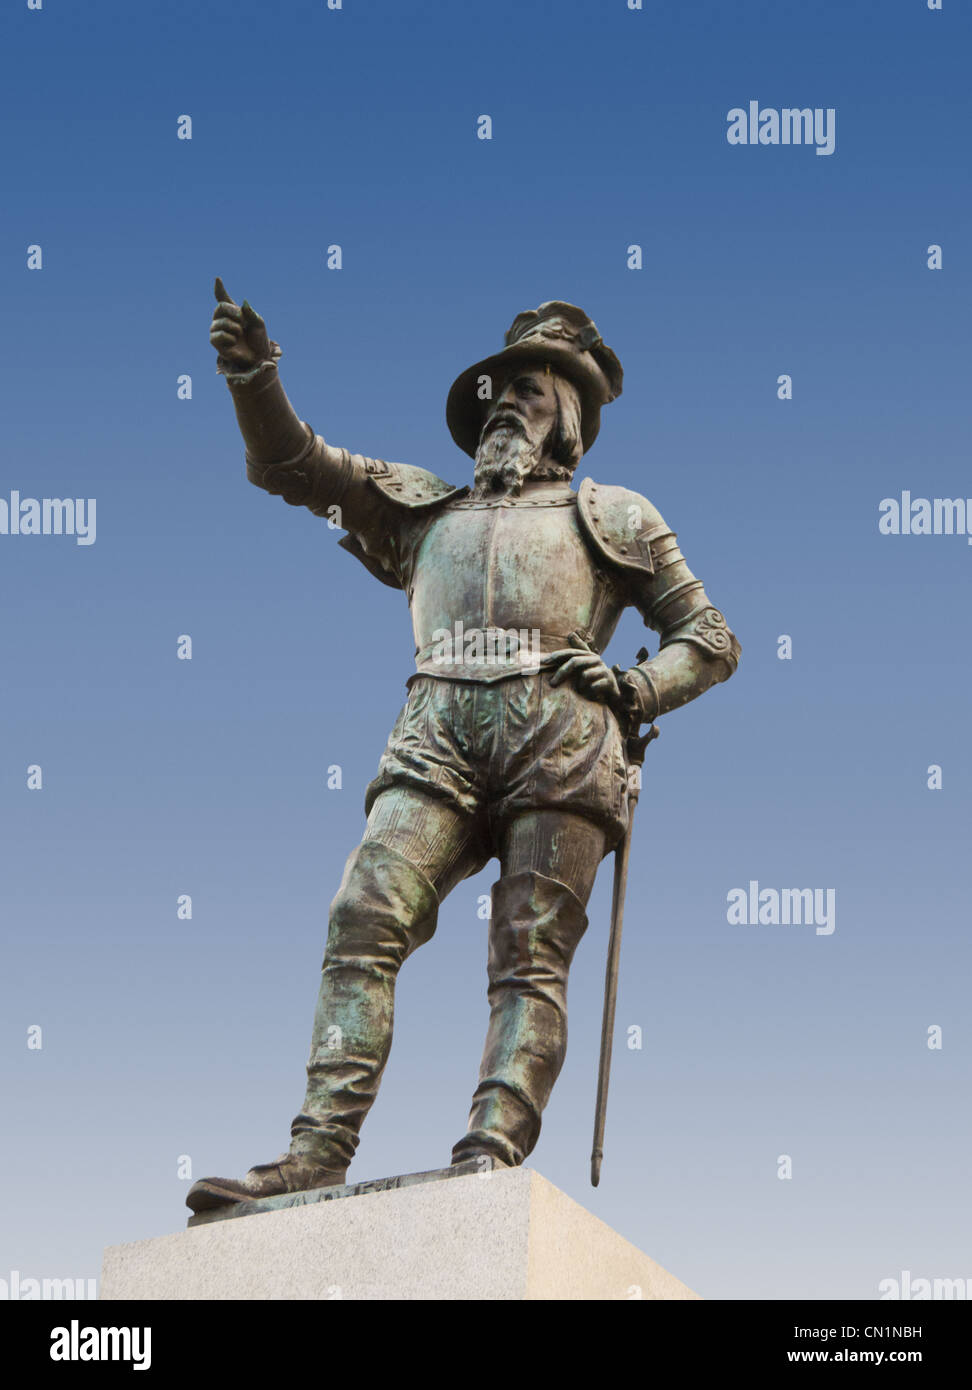 Statue of Juan Ponce de Leon, the discoverer of Florida, landed 1513 in St. Augustine, Florida, USA Stock Photo